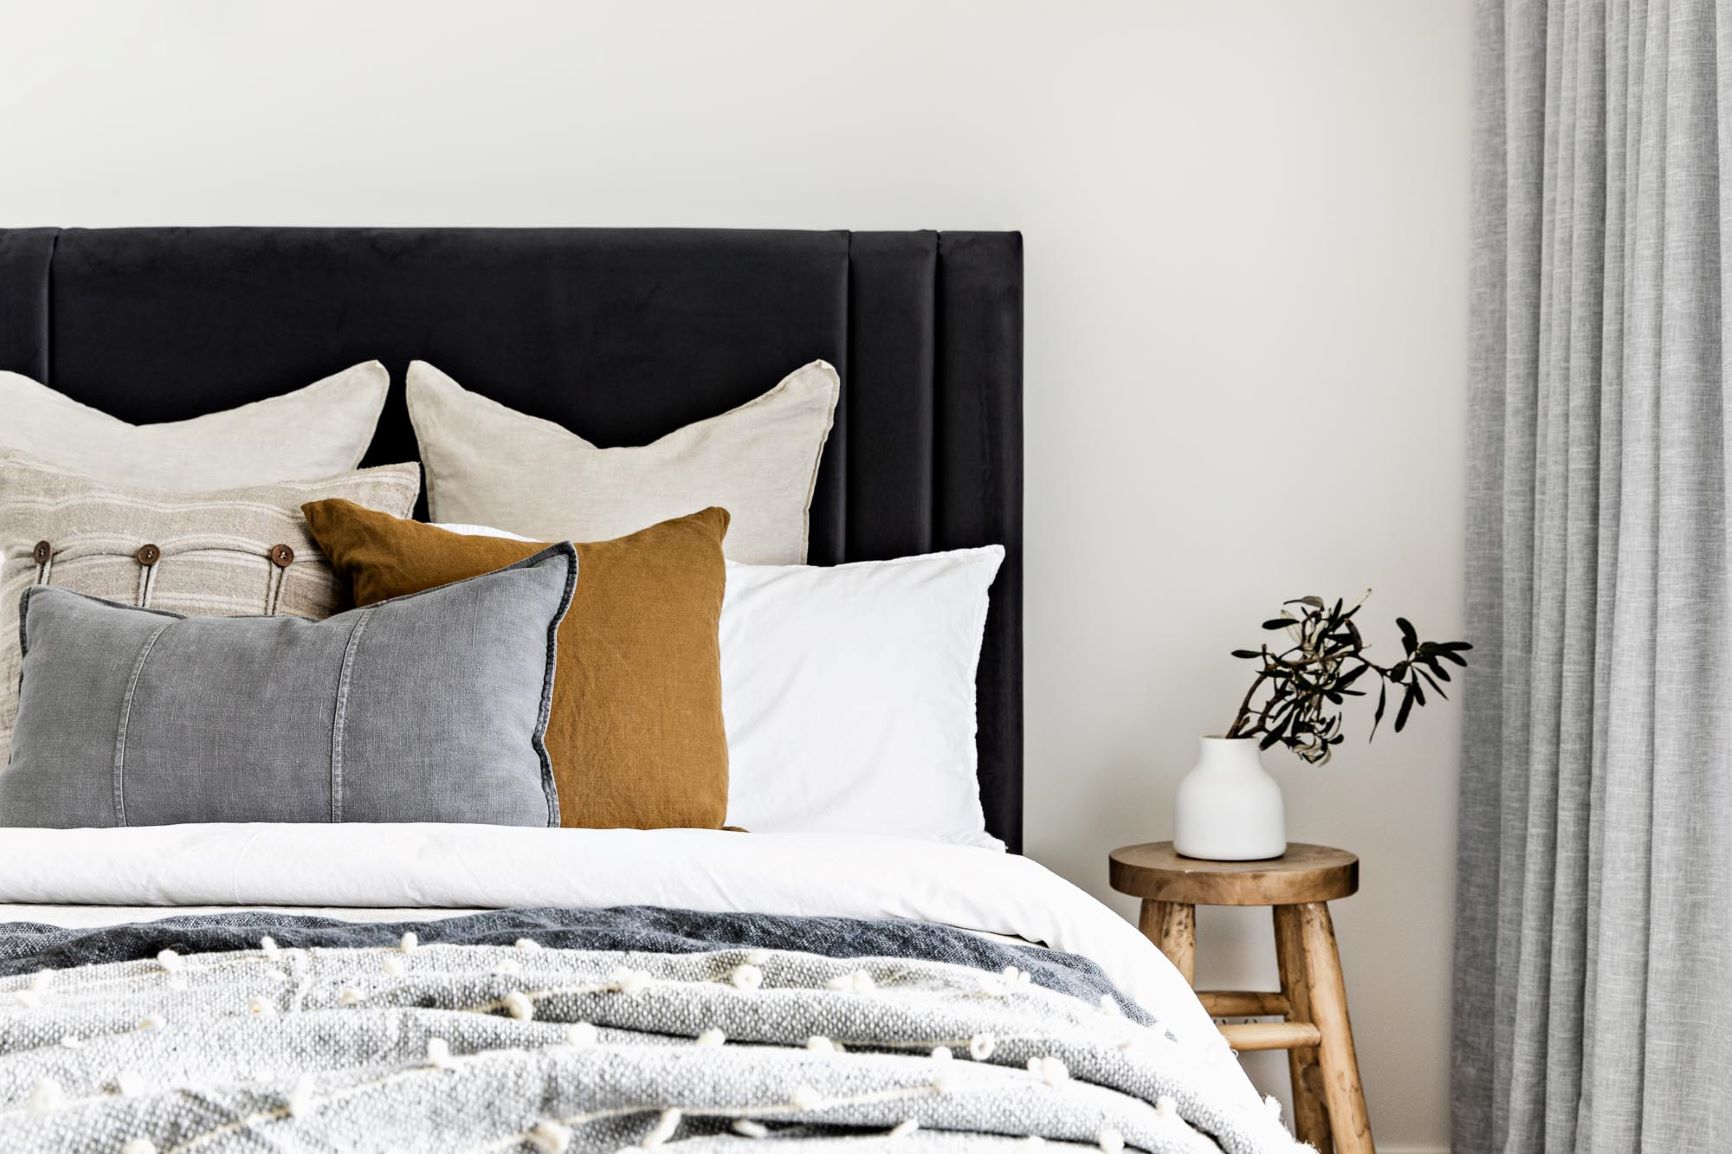 How to choose an upholstered bedhead